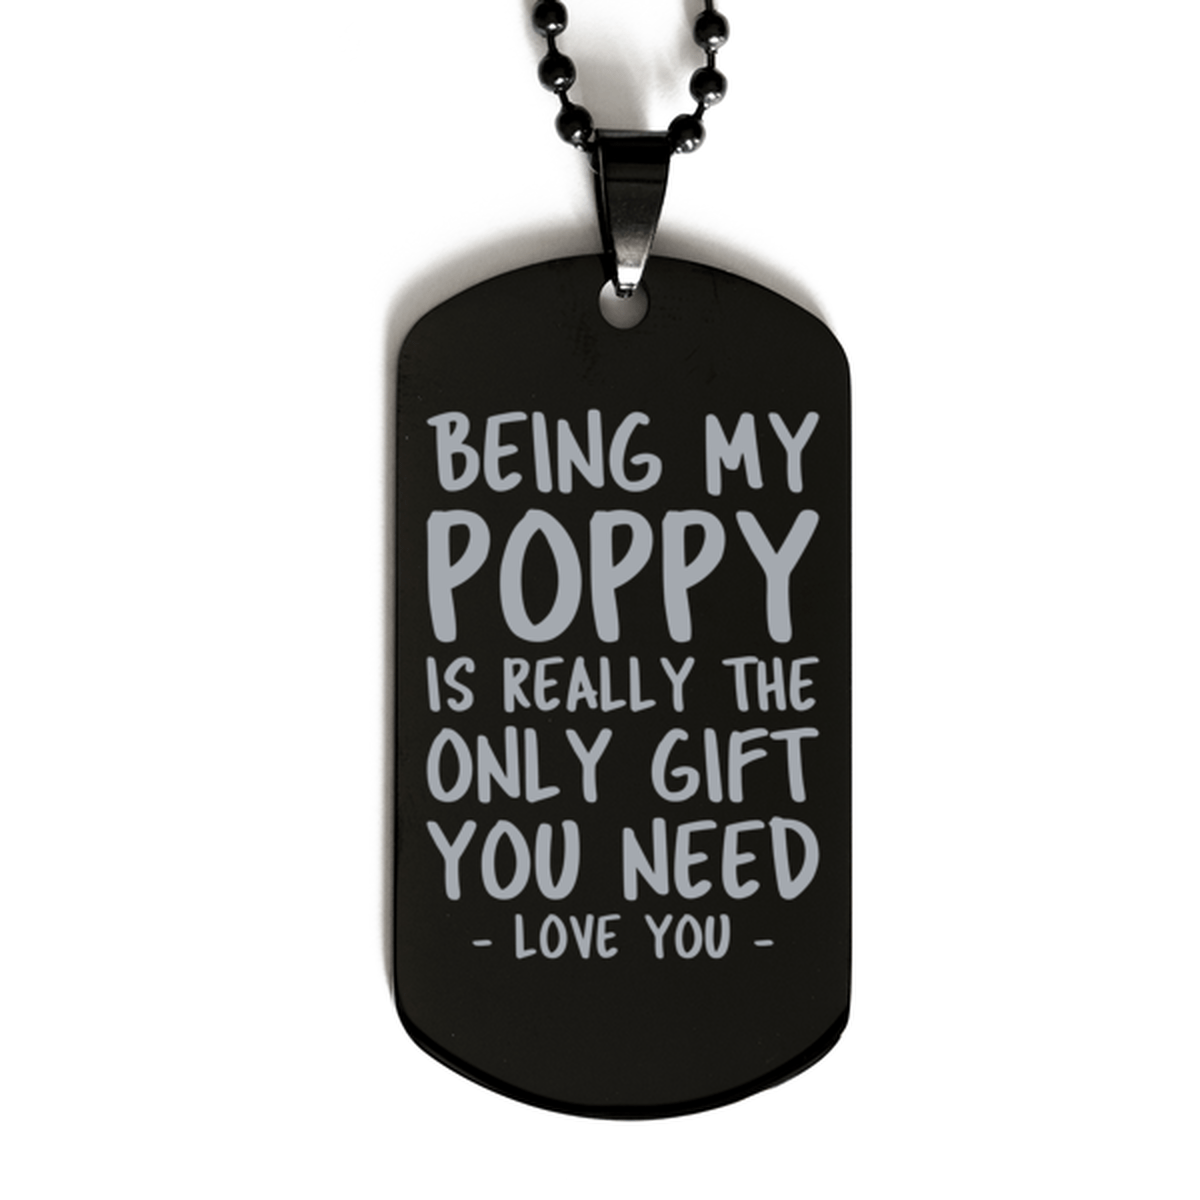 Funny Poppy Black Dog Tag Necklace, Being My Poppy Is Really the Only Gift You Need, Best Birthday Gifts for Poppy